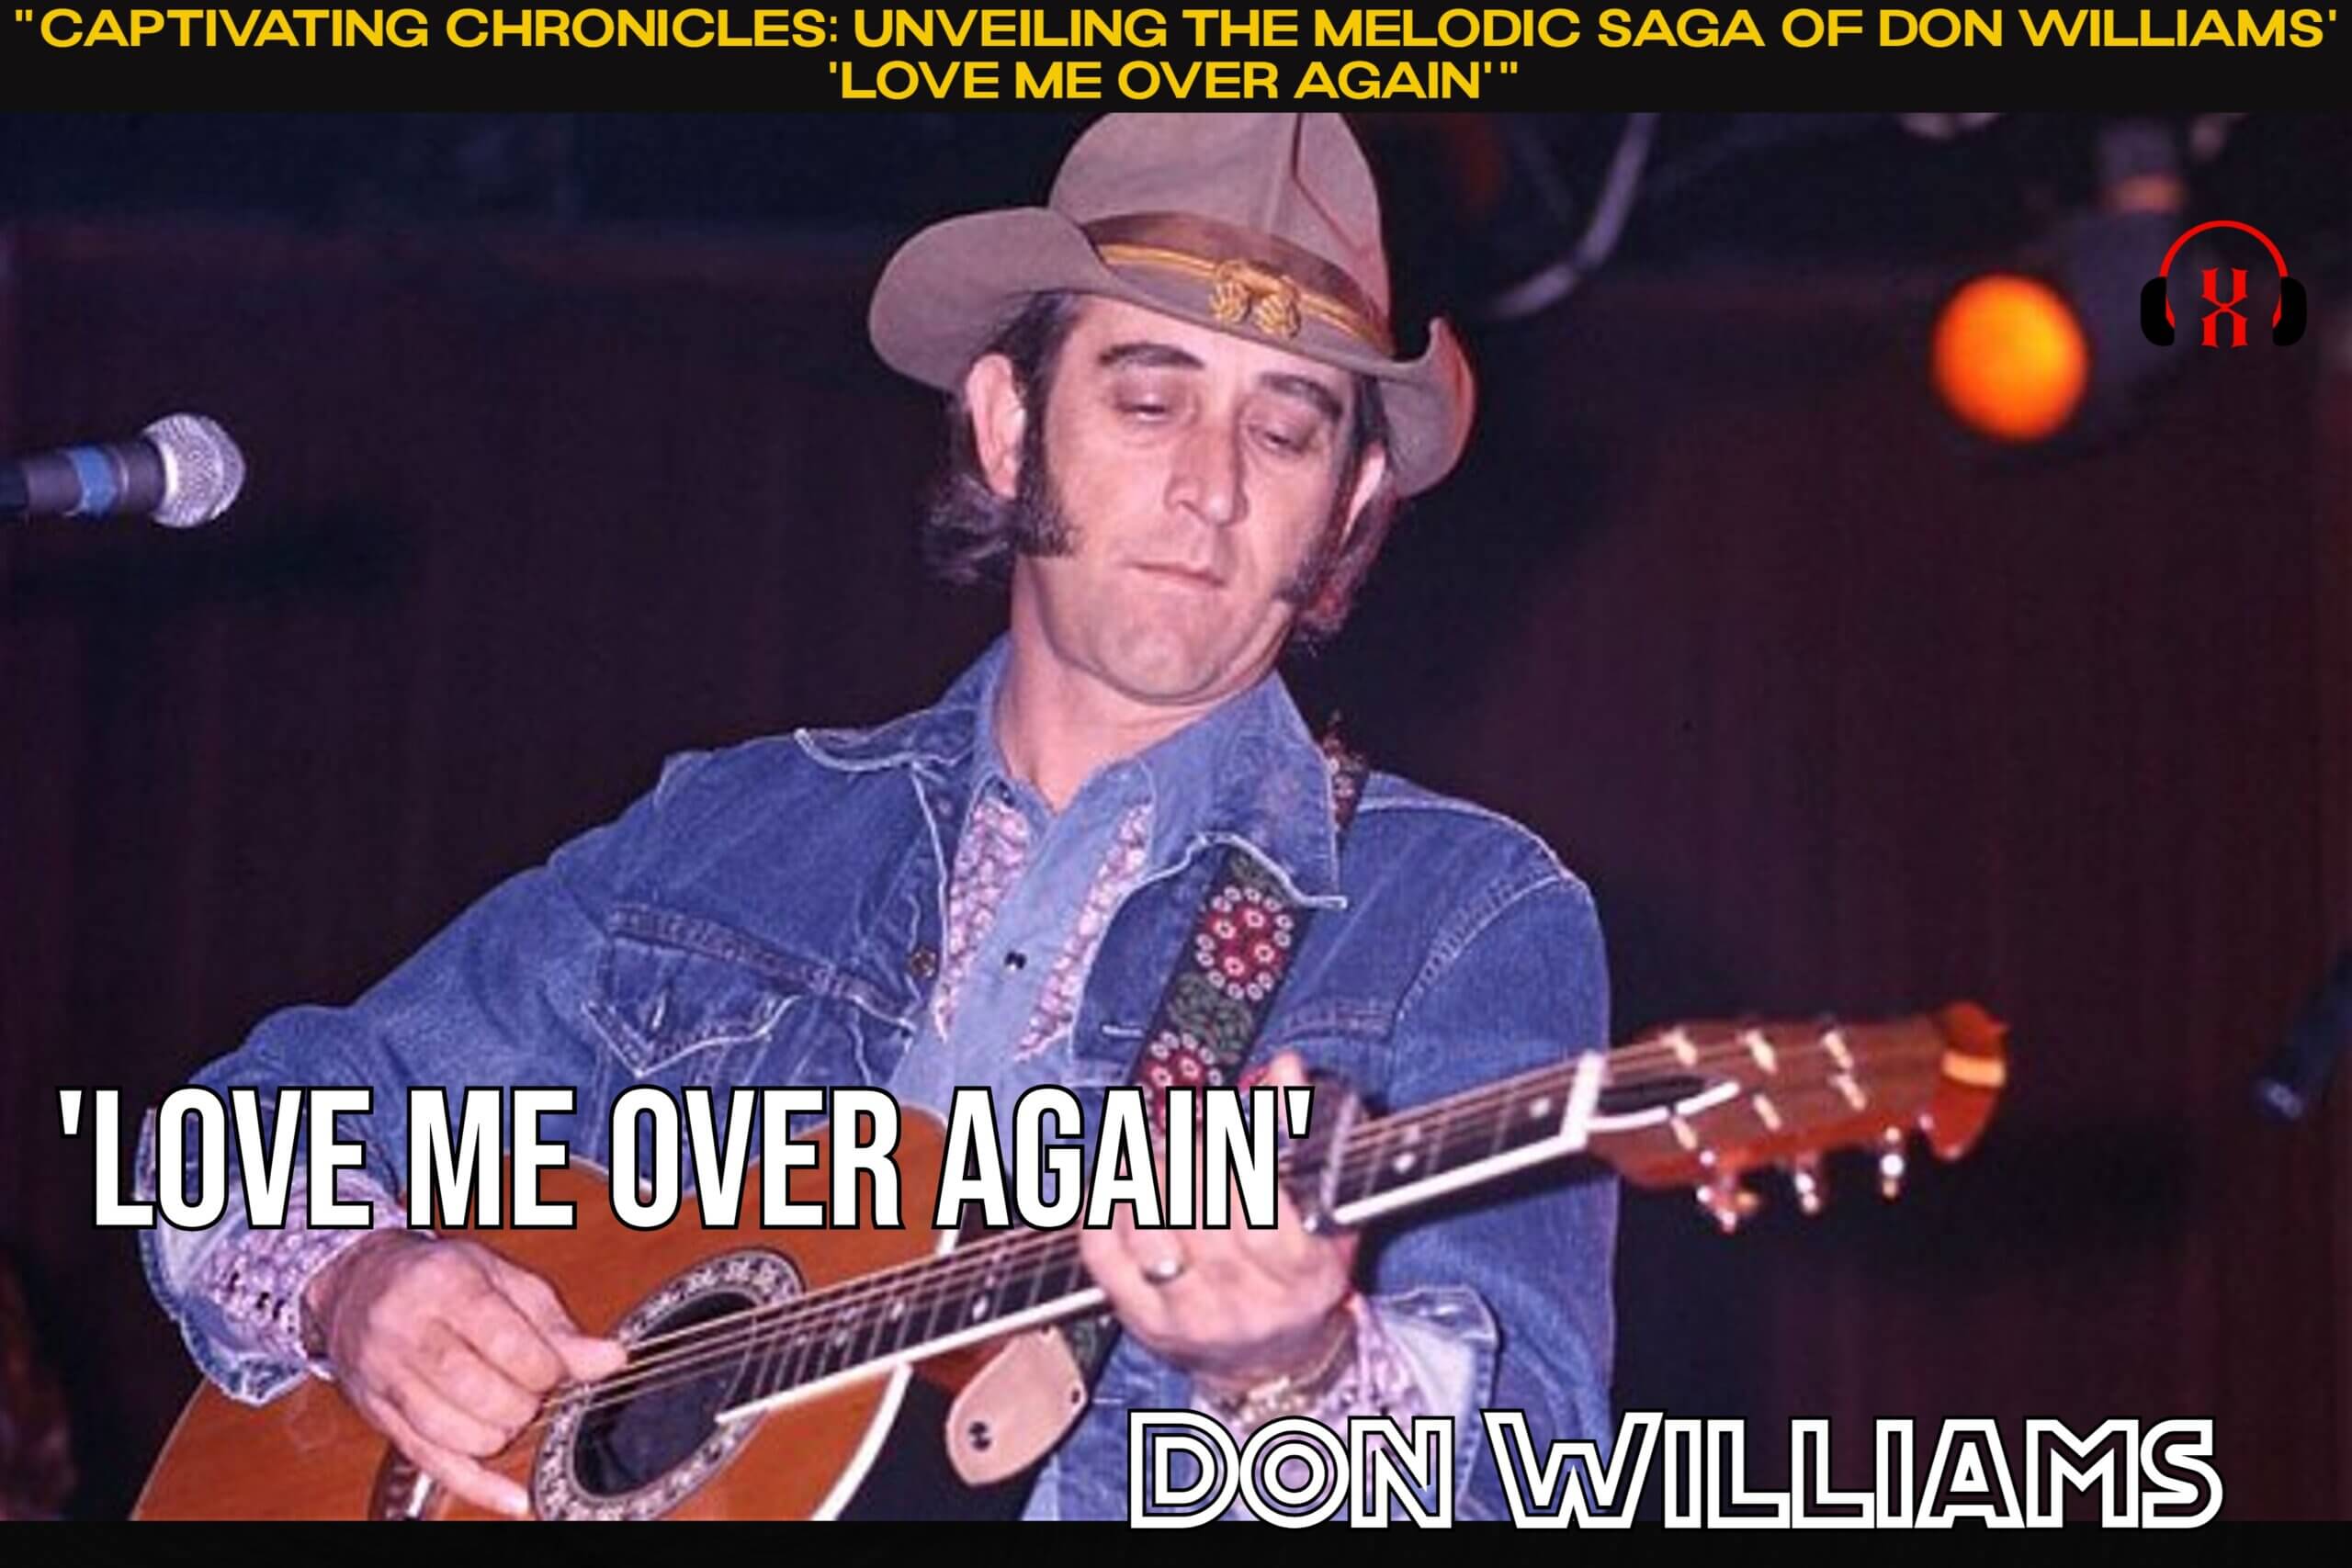 "Captivating Chronicles: Unveiling the Melodic Saga of Don Williams' 'Love Me Over Again'"